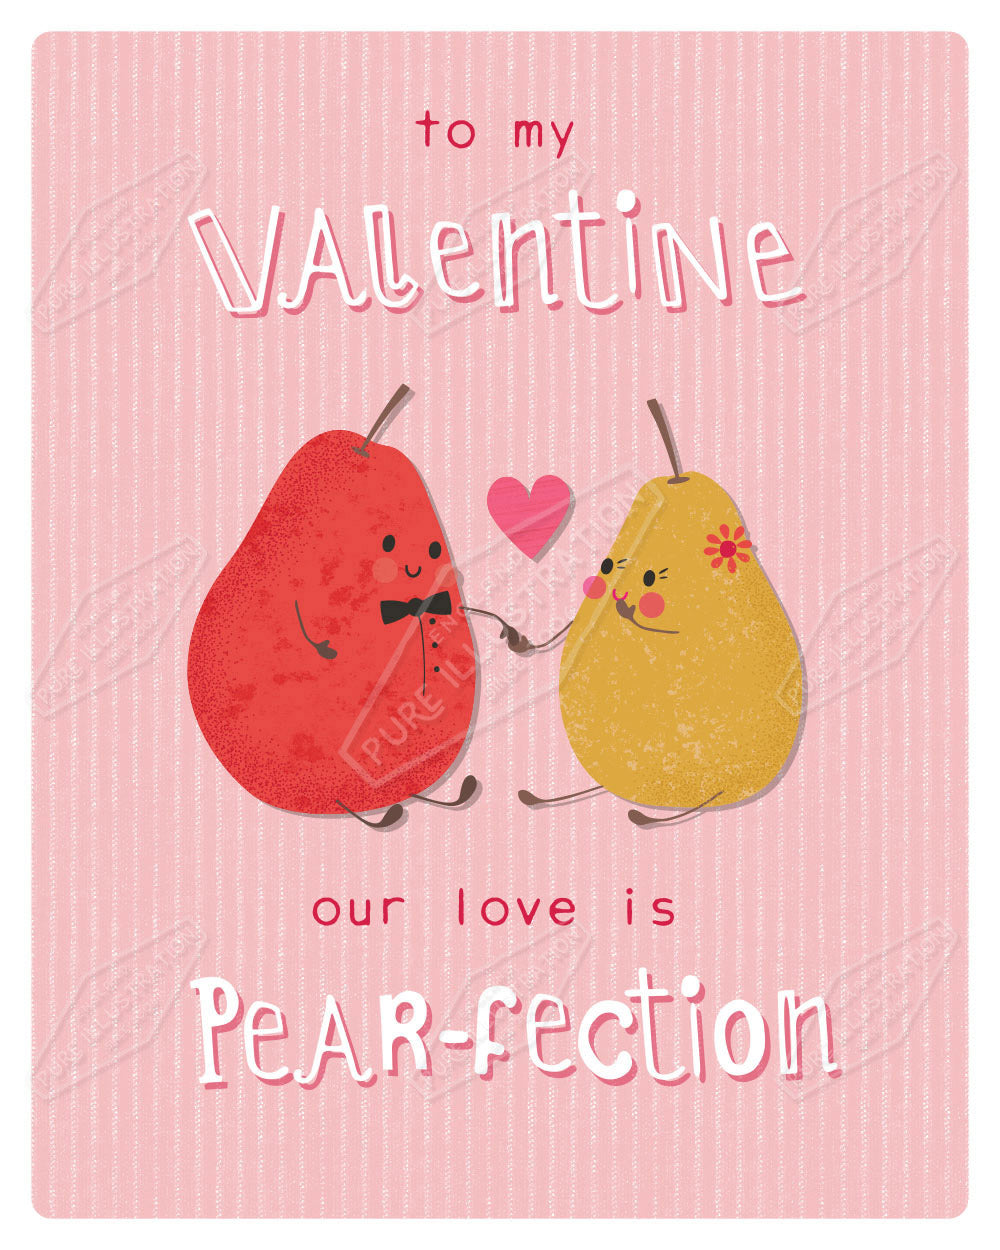 Valentines Pear-Fection Humour Design by Gill Eggleston for Pure Art Licensing Agency & Surface Design Studio